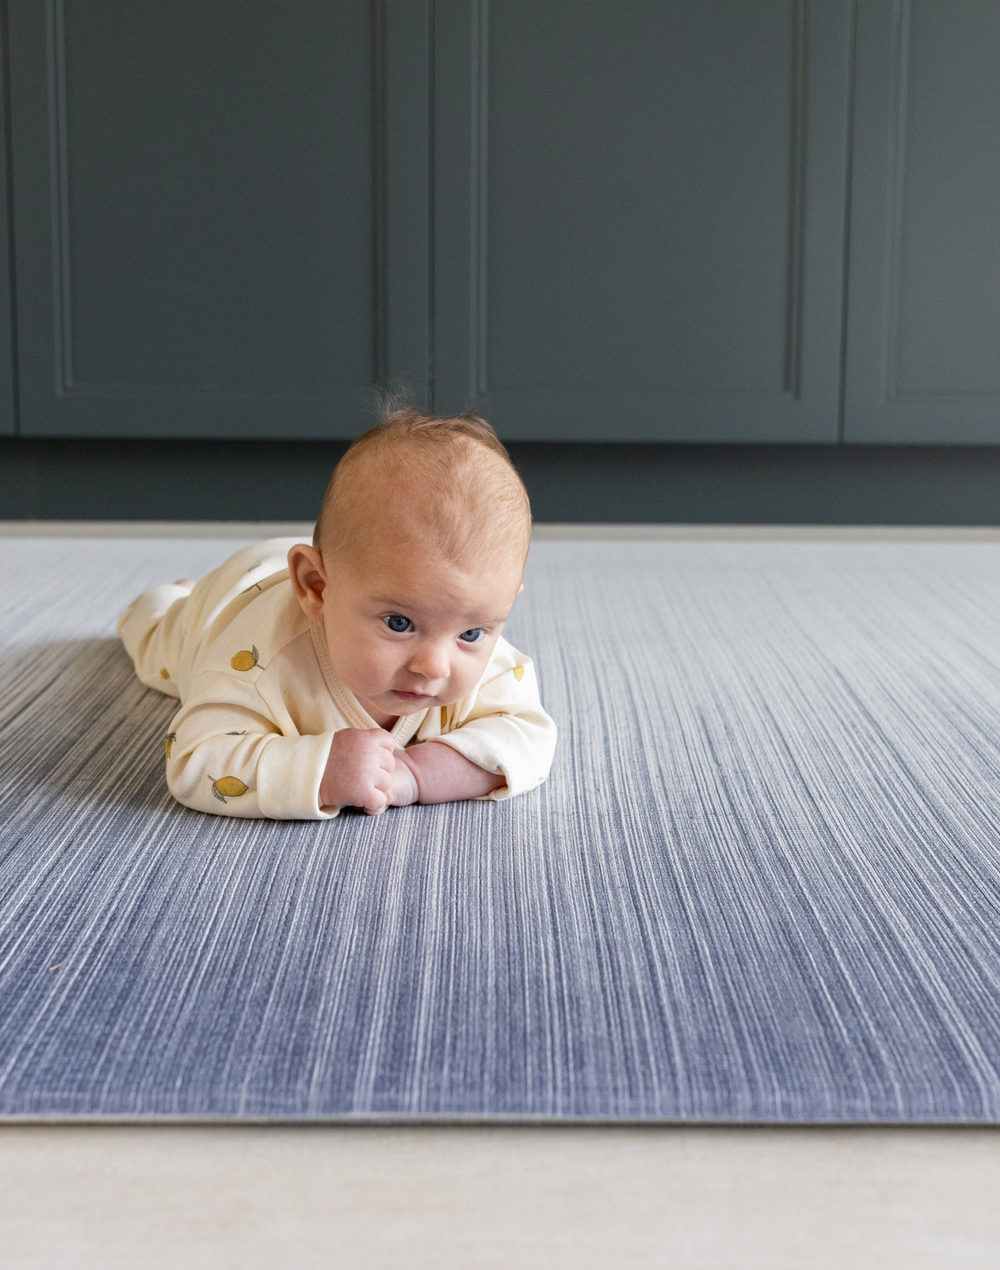 Baby enjoying tummy time on The Kasuri a large padded floor mat by Totter and Tumble adds a stylish appeal to the space it is unrolled in with a one piece design that is washable so spillages are easy to clean the perfect play rug for the home